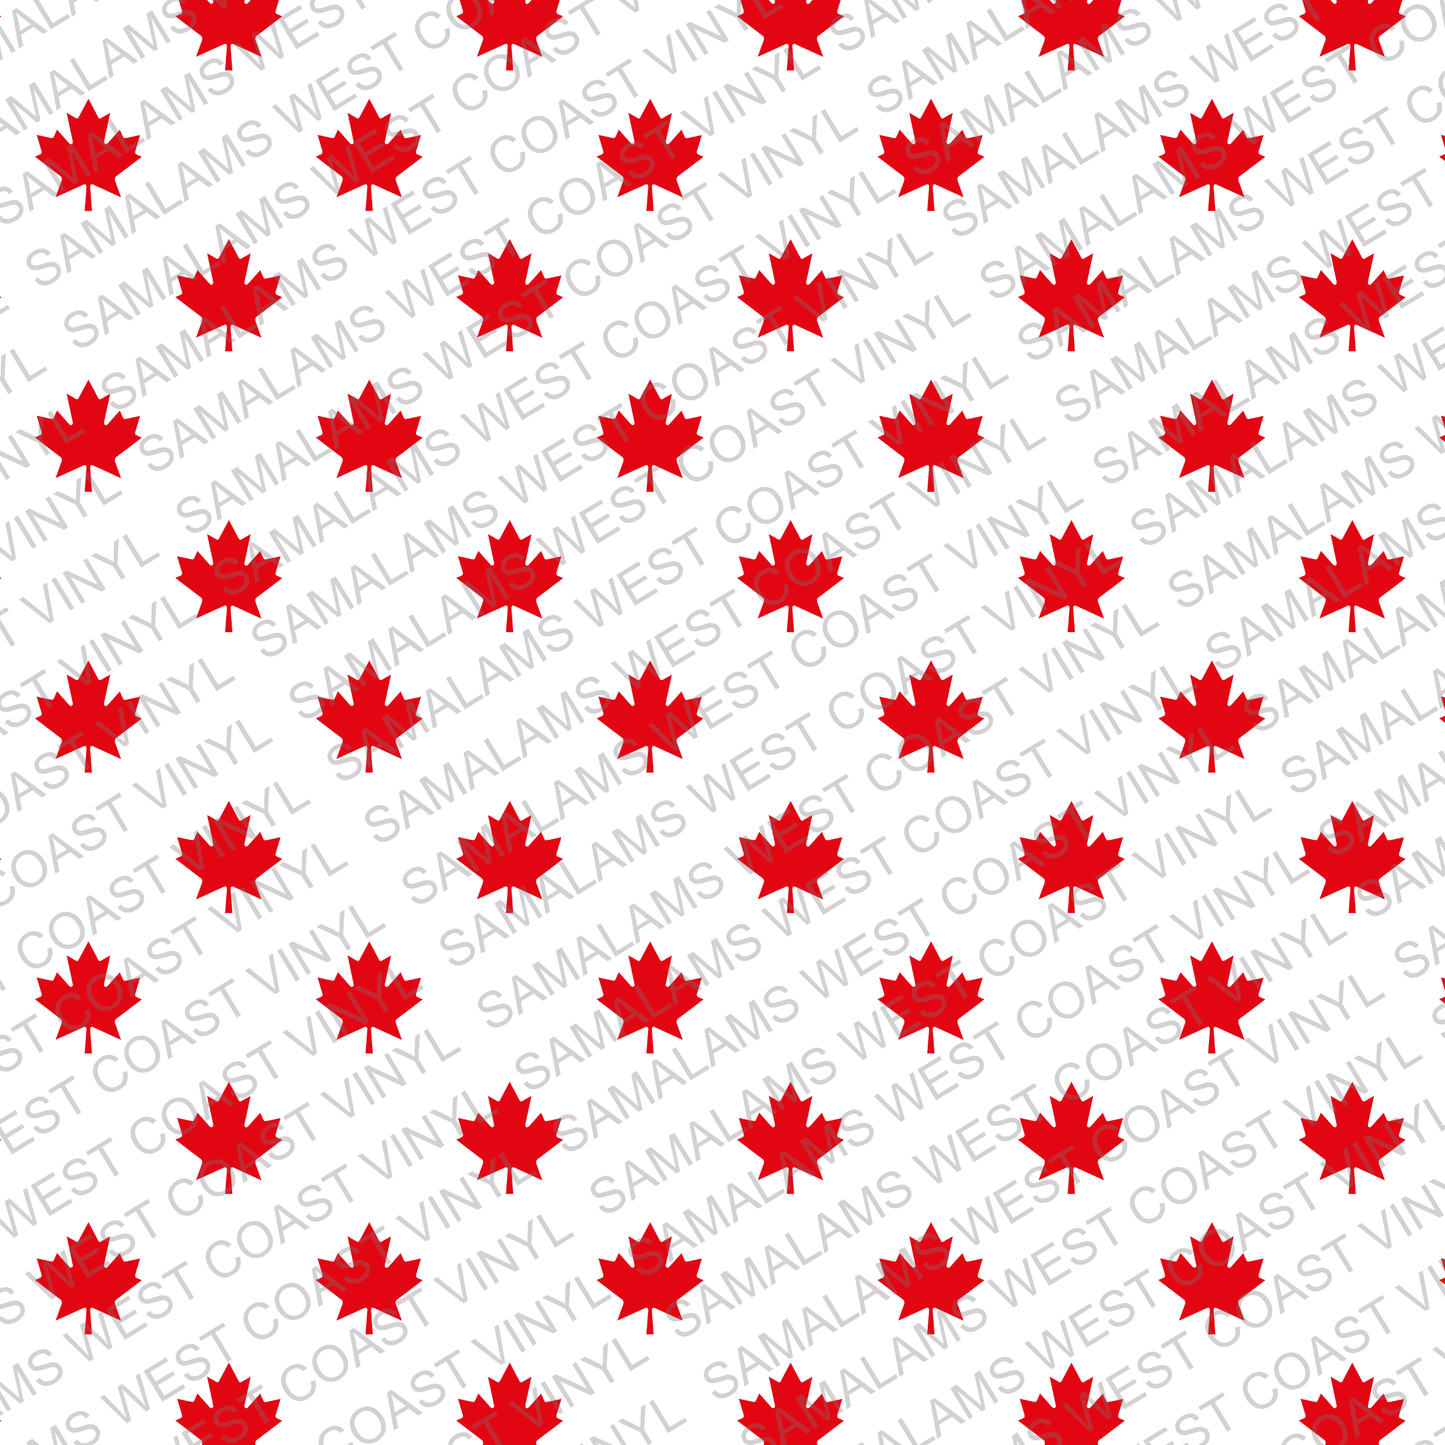 Canada Day - Pack 1 (Not Seamless)